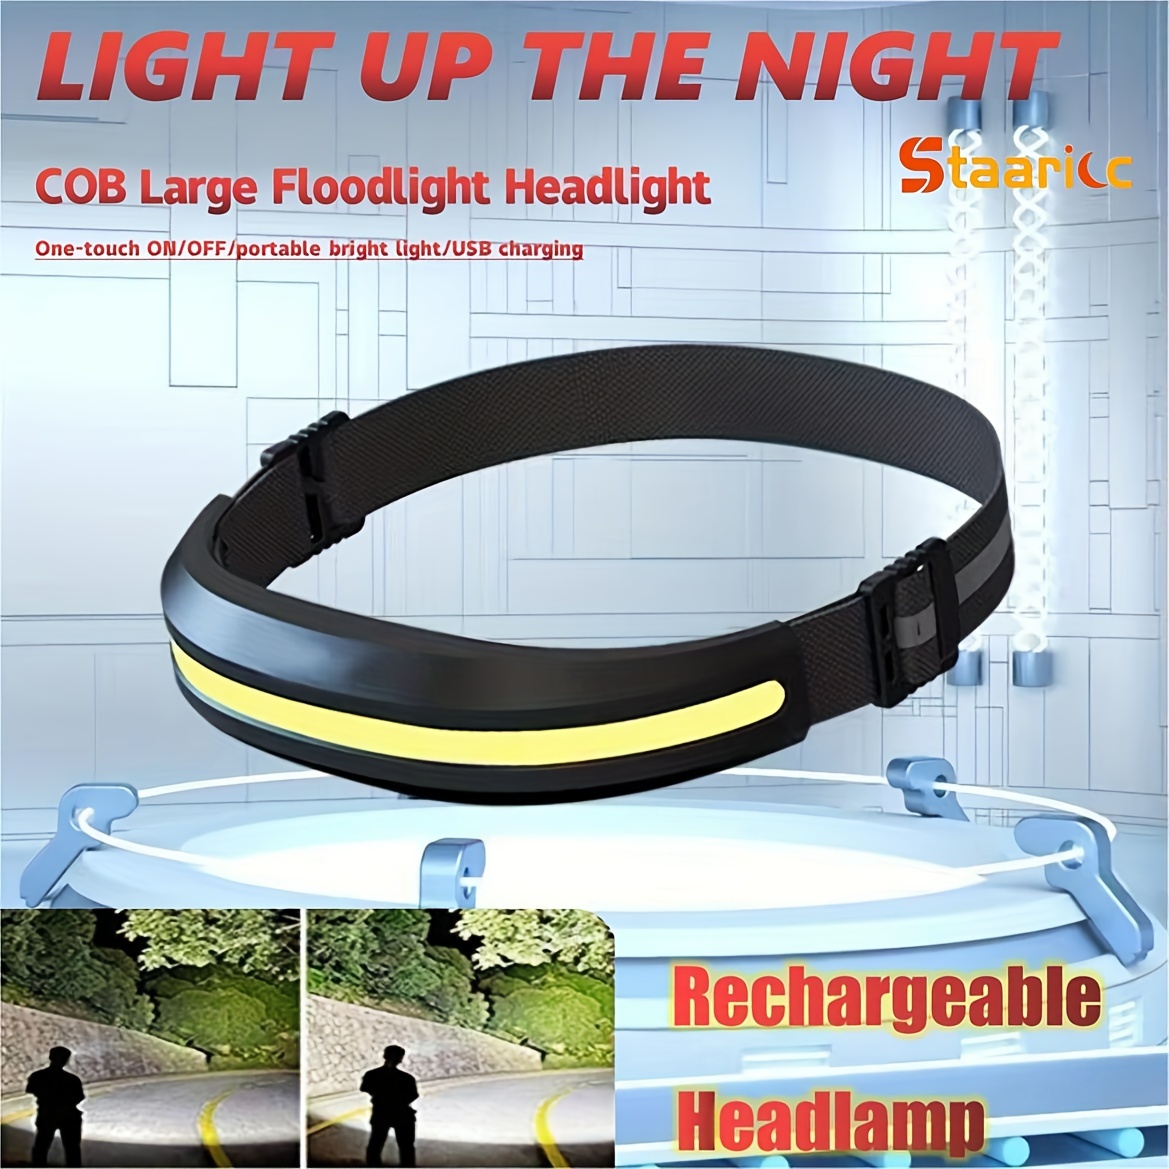 

1pc Rechargeable Headlamp, 230° Wide Beam Head Lamp Led For Camping Accessories Gear, Waterproof Cob Head Light Flashlight For Hiking, Repairing, Fishing, Emergency Rescue